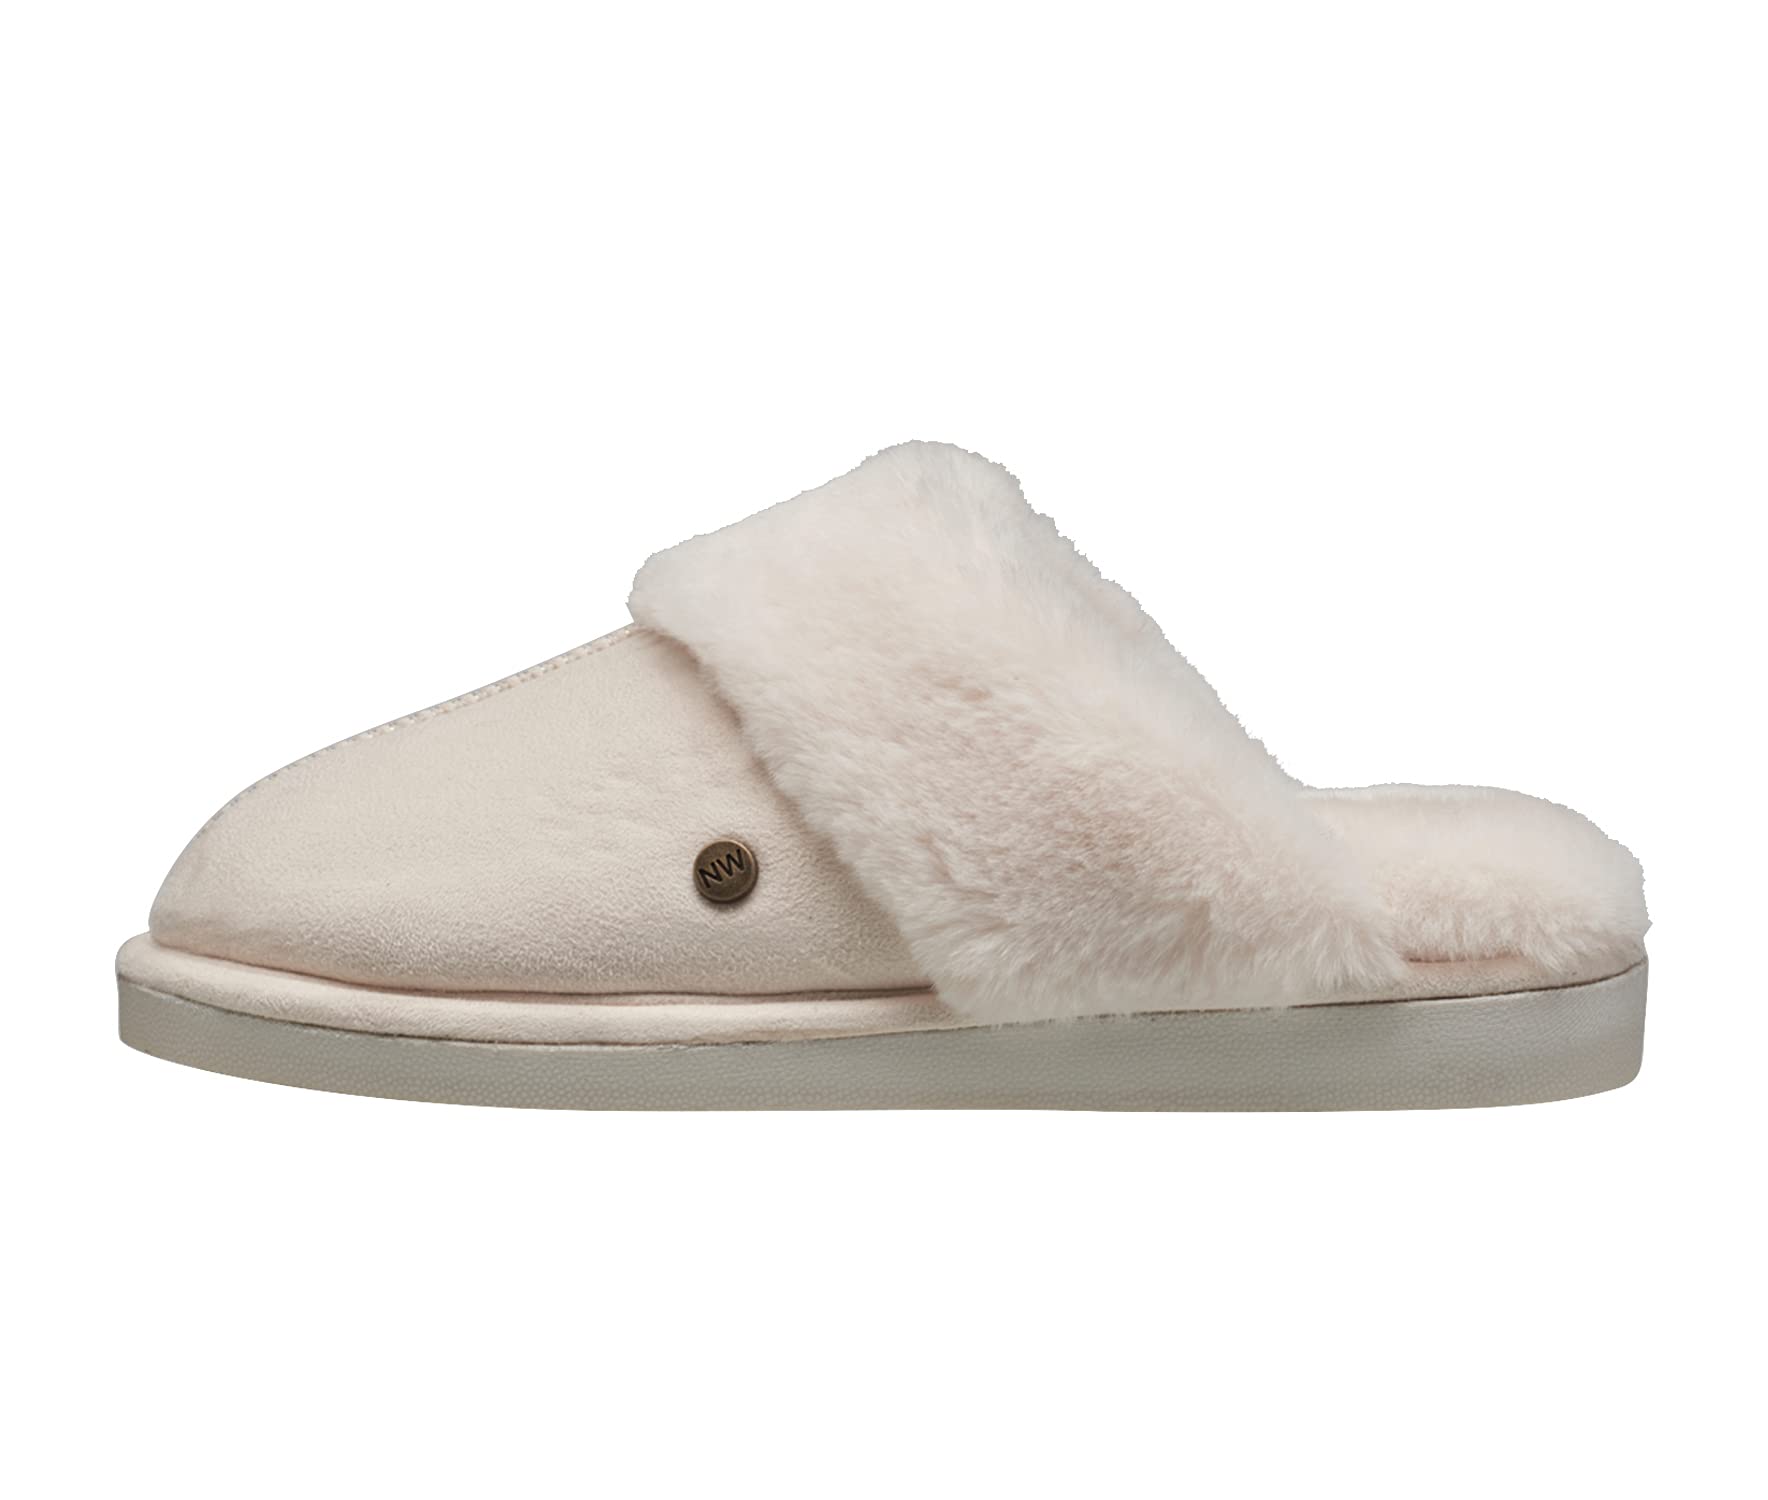 NINE WEST Scuff Slippers For Women, Extra Soft & Comfortable Winter House Shoes